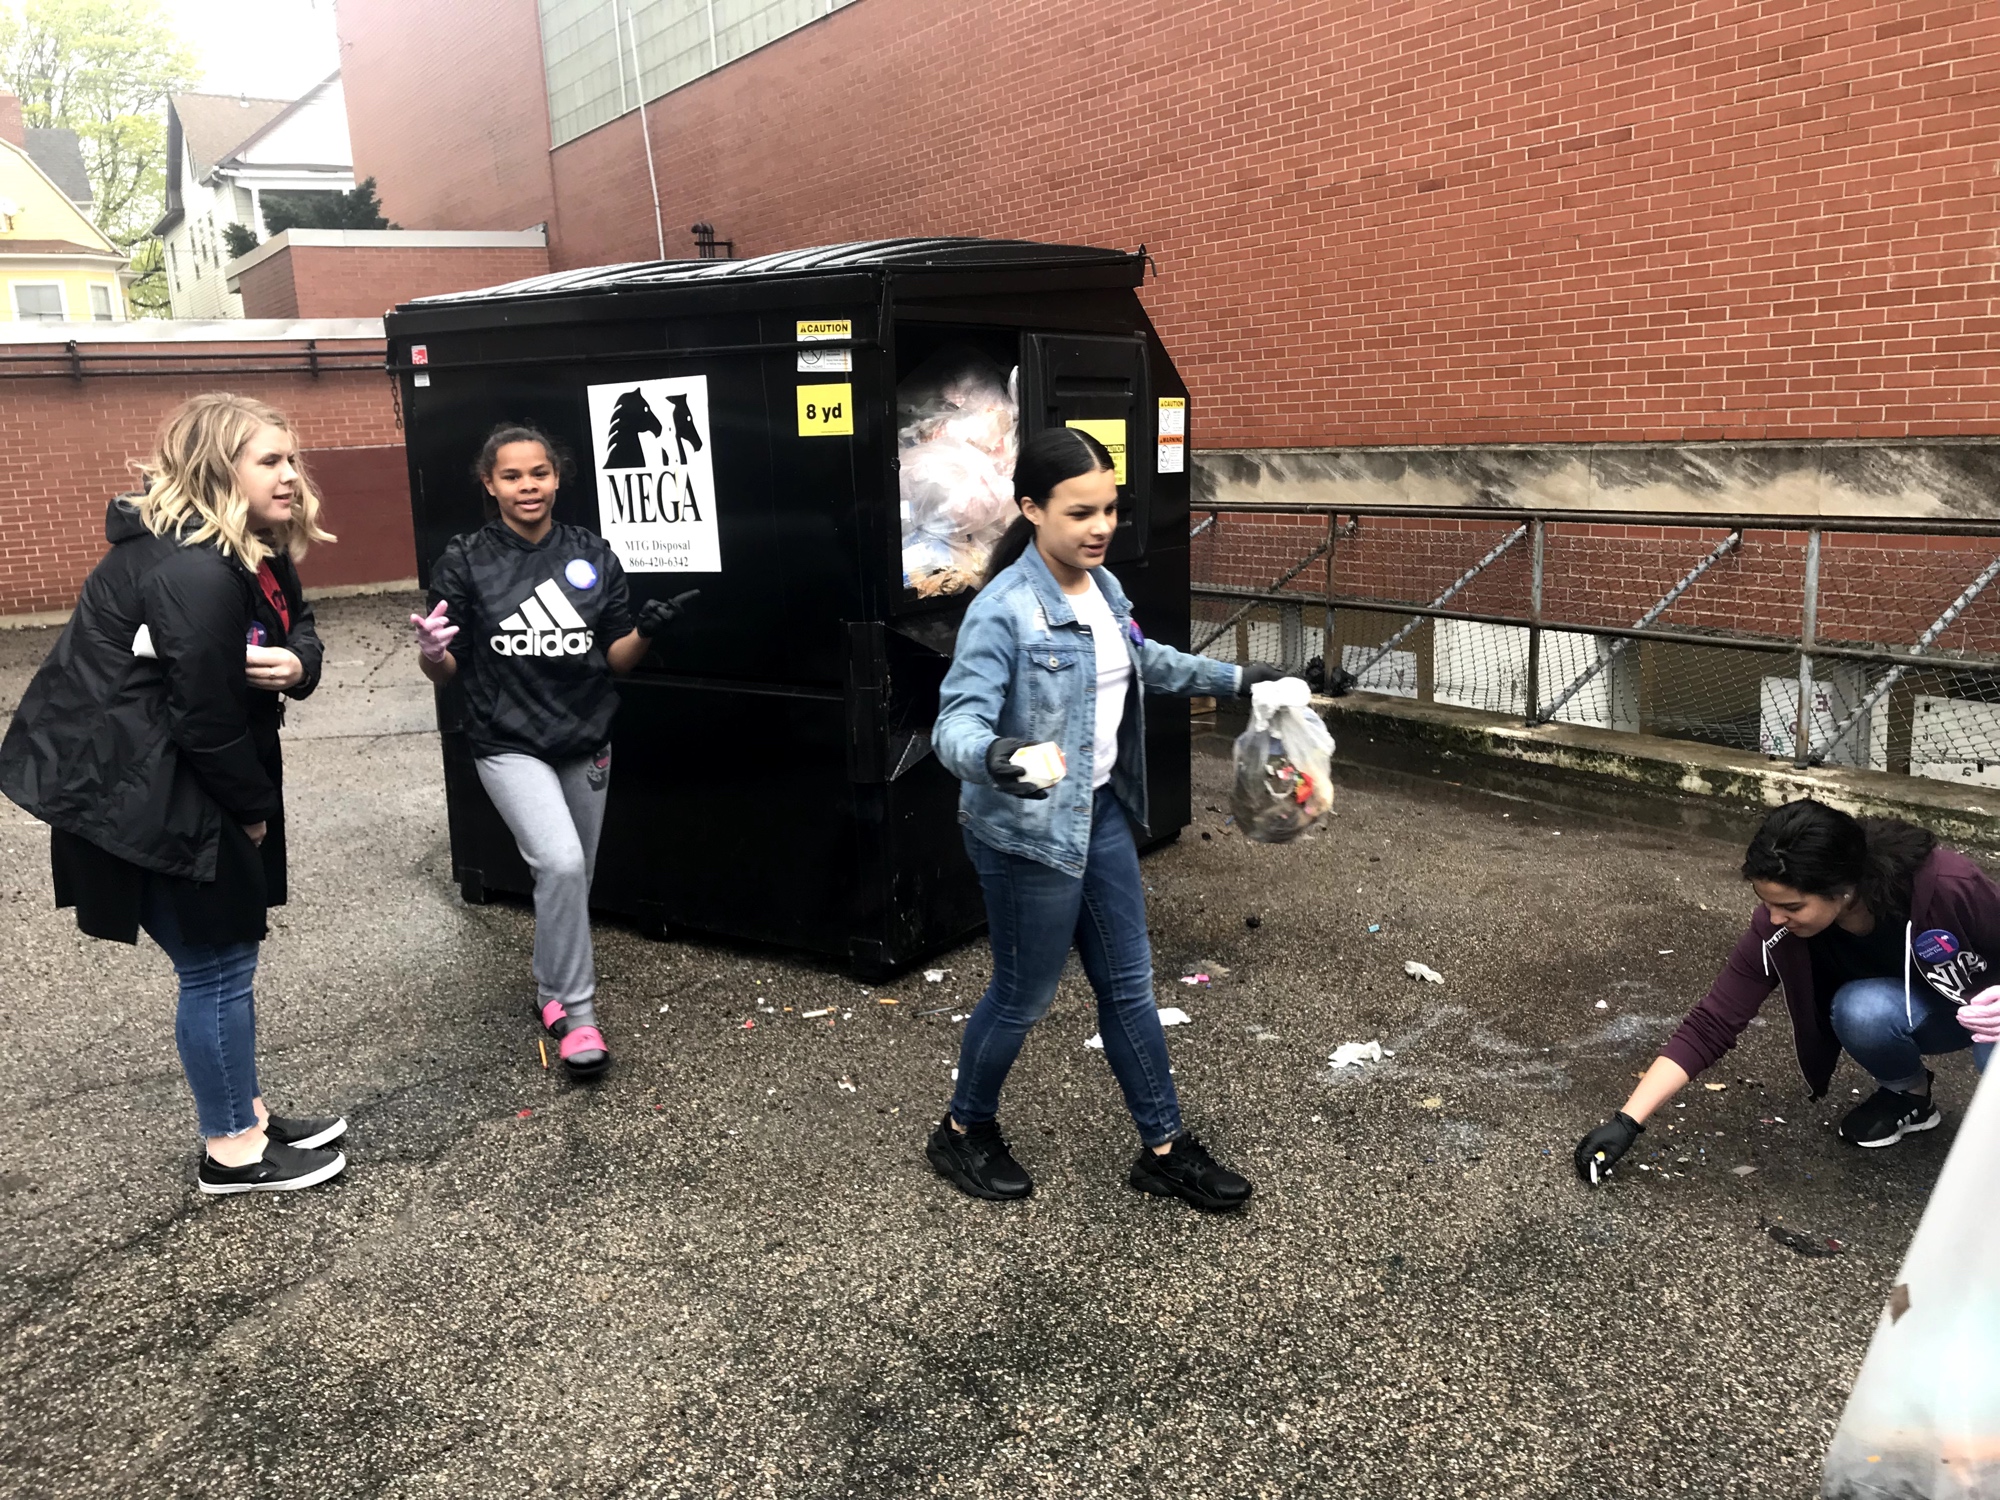  Earth Day Cleanup organized by the WBMS Student Council 